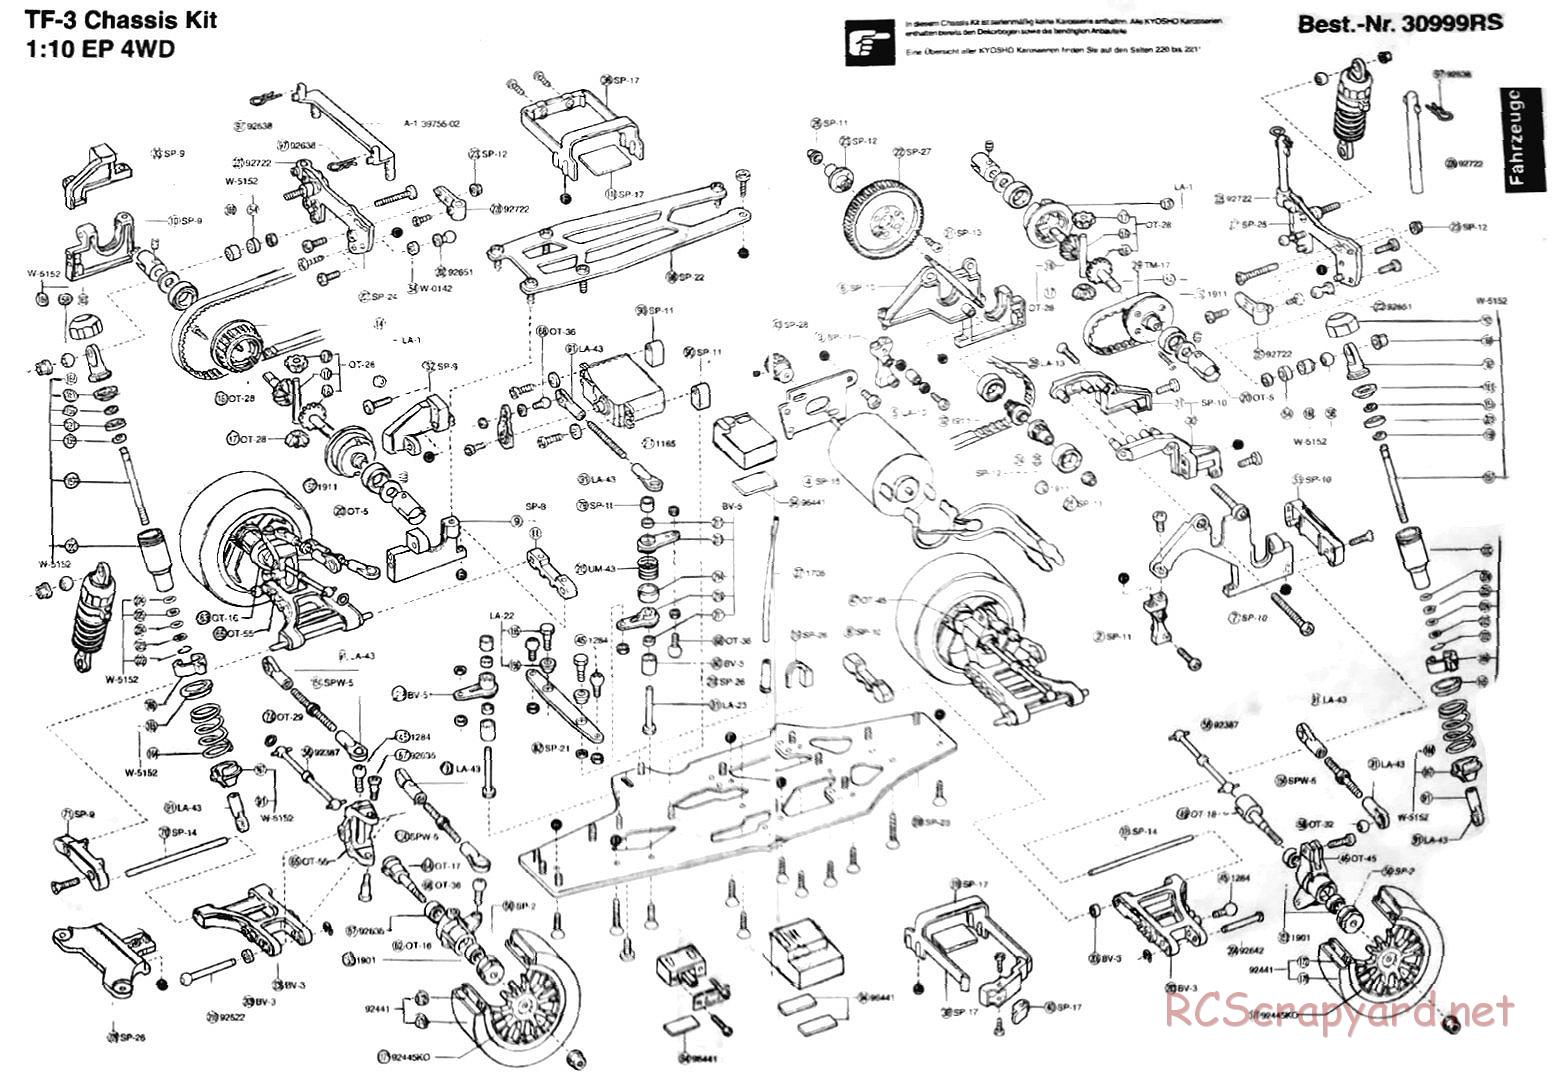 Kyosho - PureTen EP Spider TF-3 - 30852 - Exploded Views - Page 1